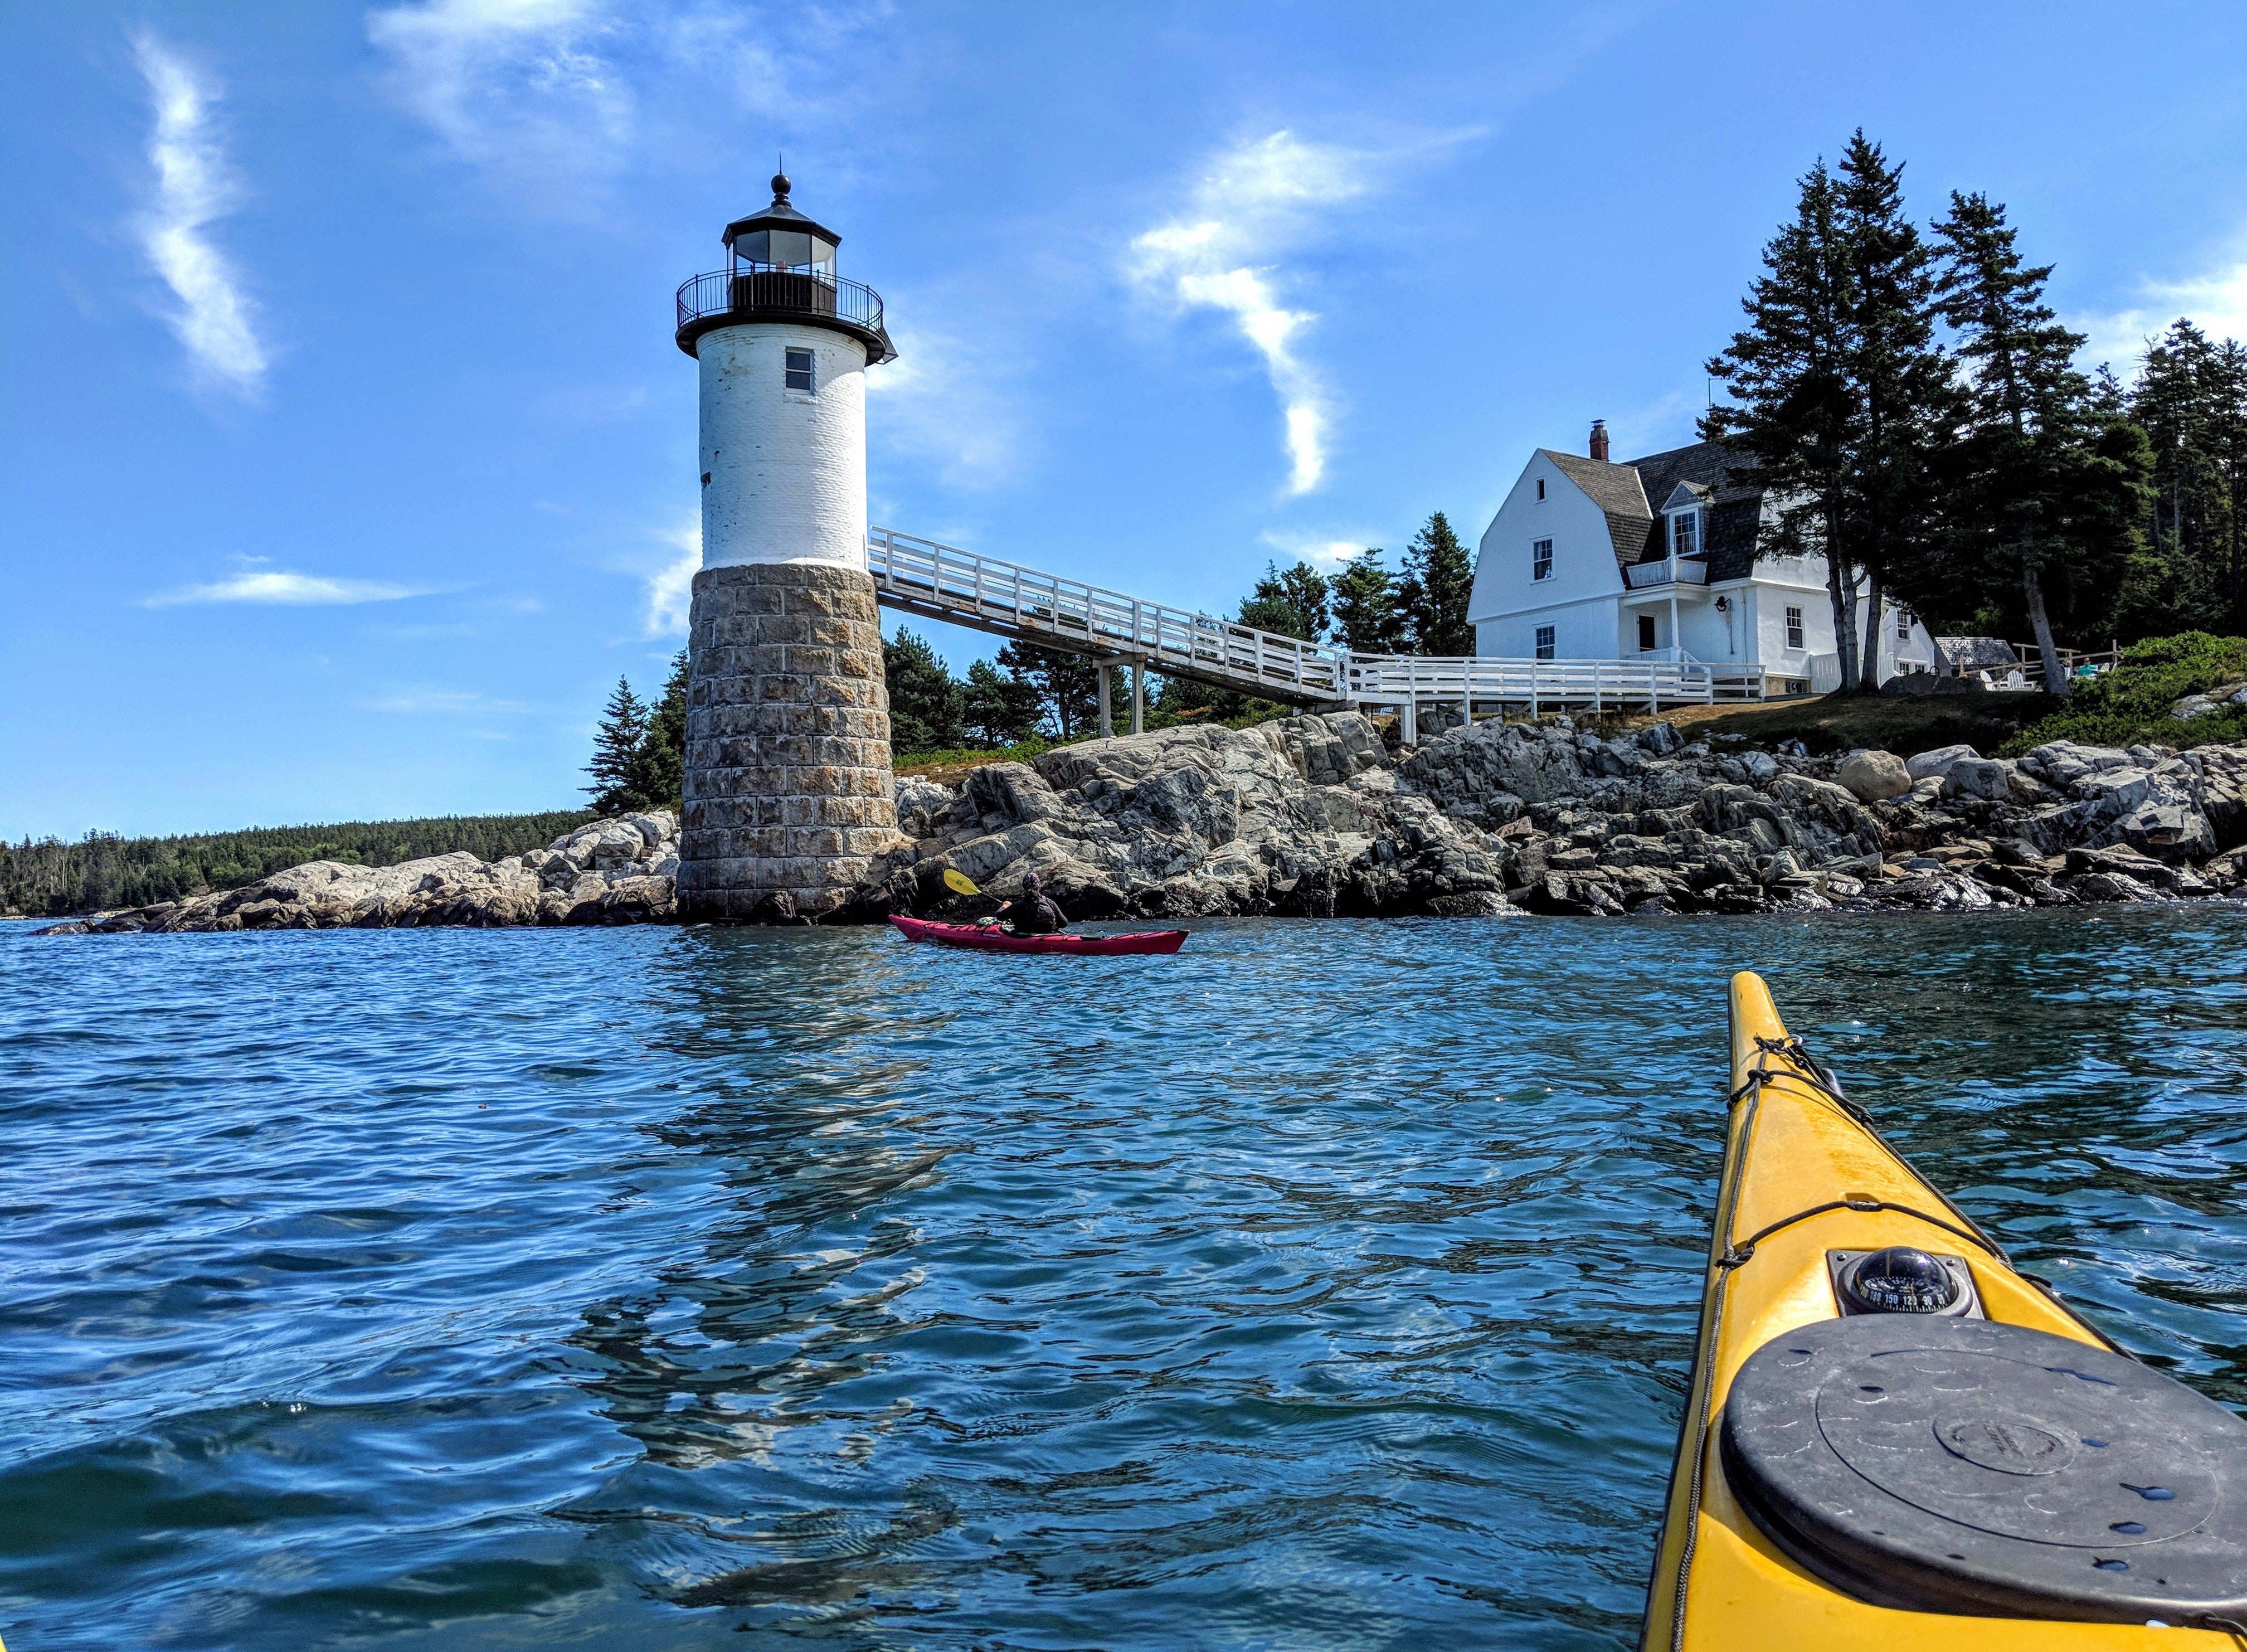 Along the way, we stopped at the Robinson Point lighthouse on Isle au Haut.  